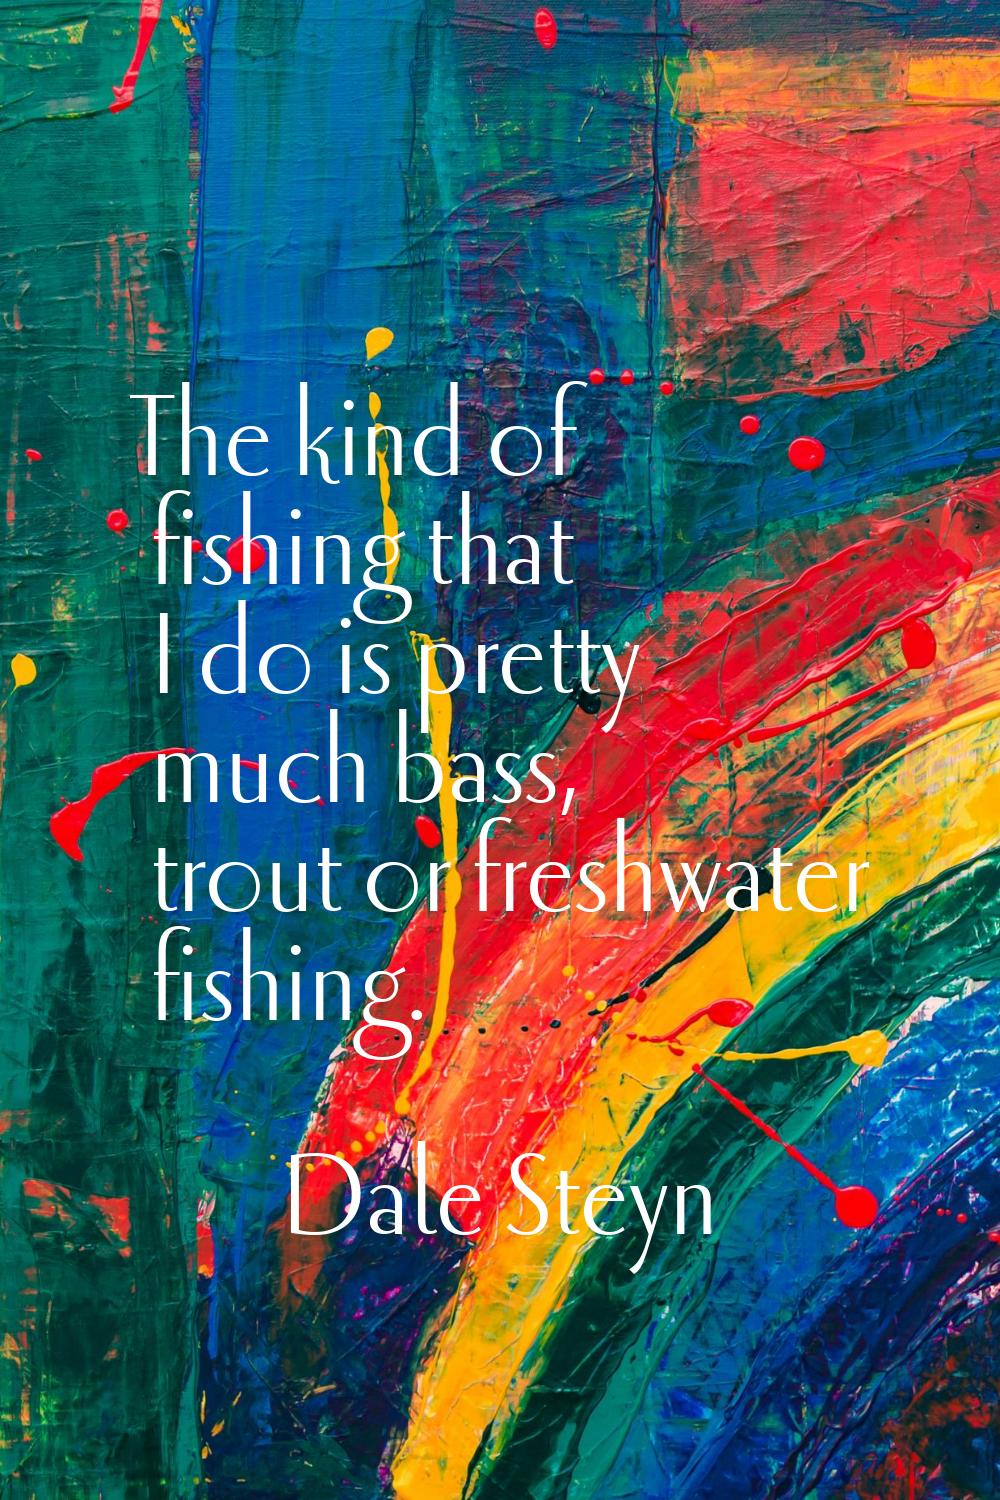 The kind of fishing that I do is pretty much bass, trout or freshwater fishing.